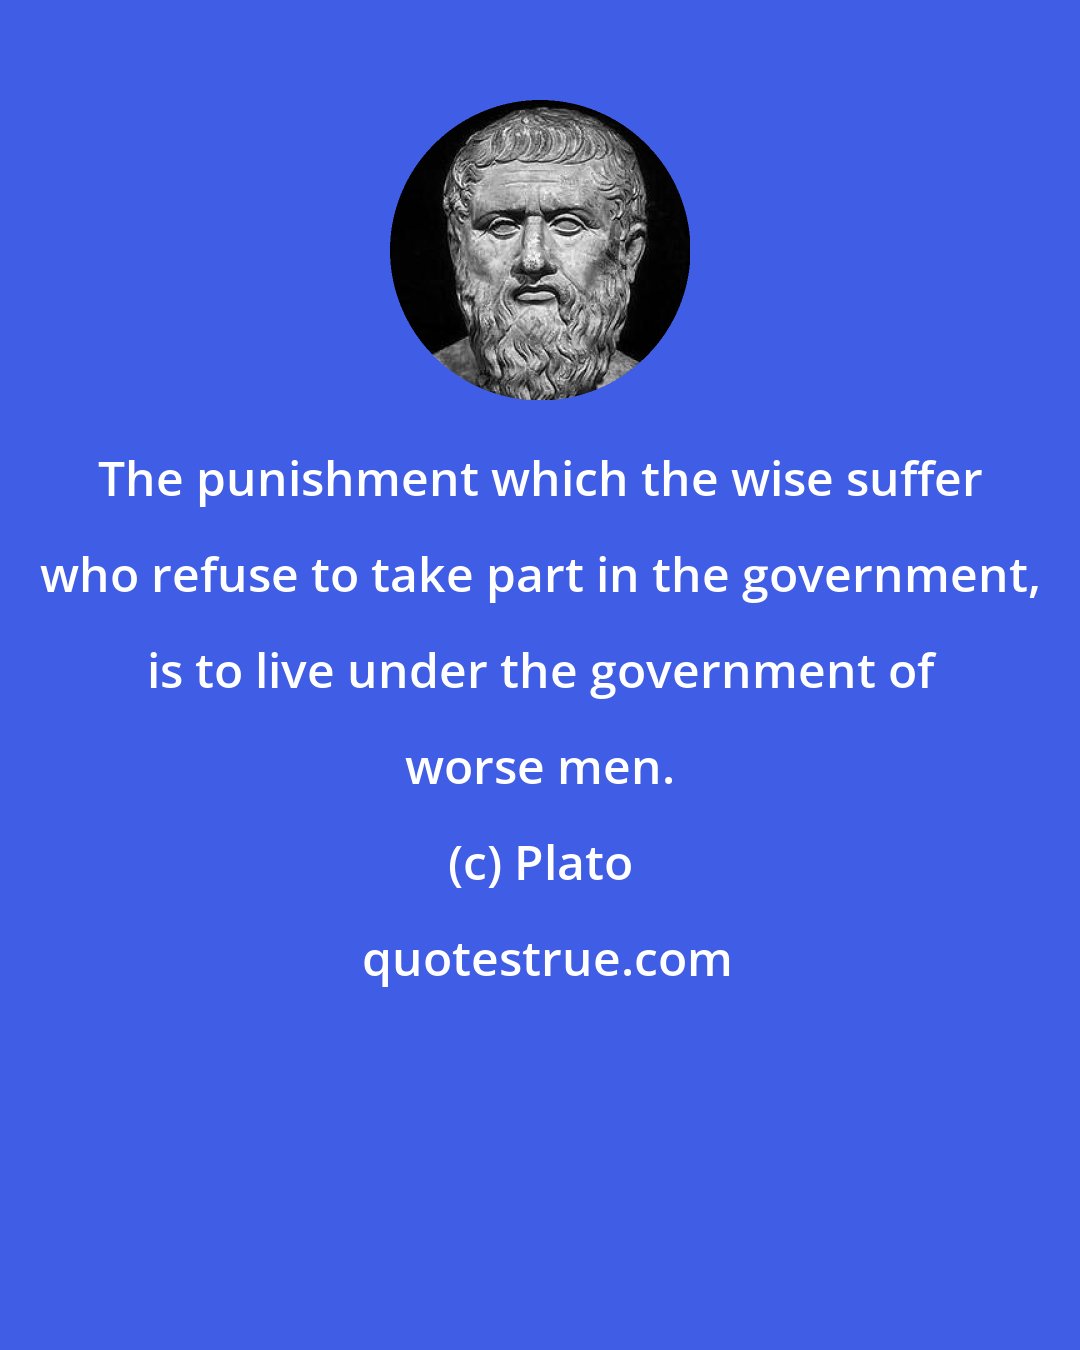 Plato: The punishment which the wise suffer who refuse to take part in the government, is to live under the government of worse men.